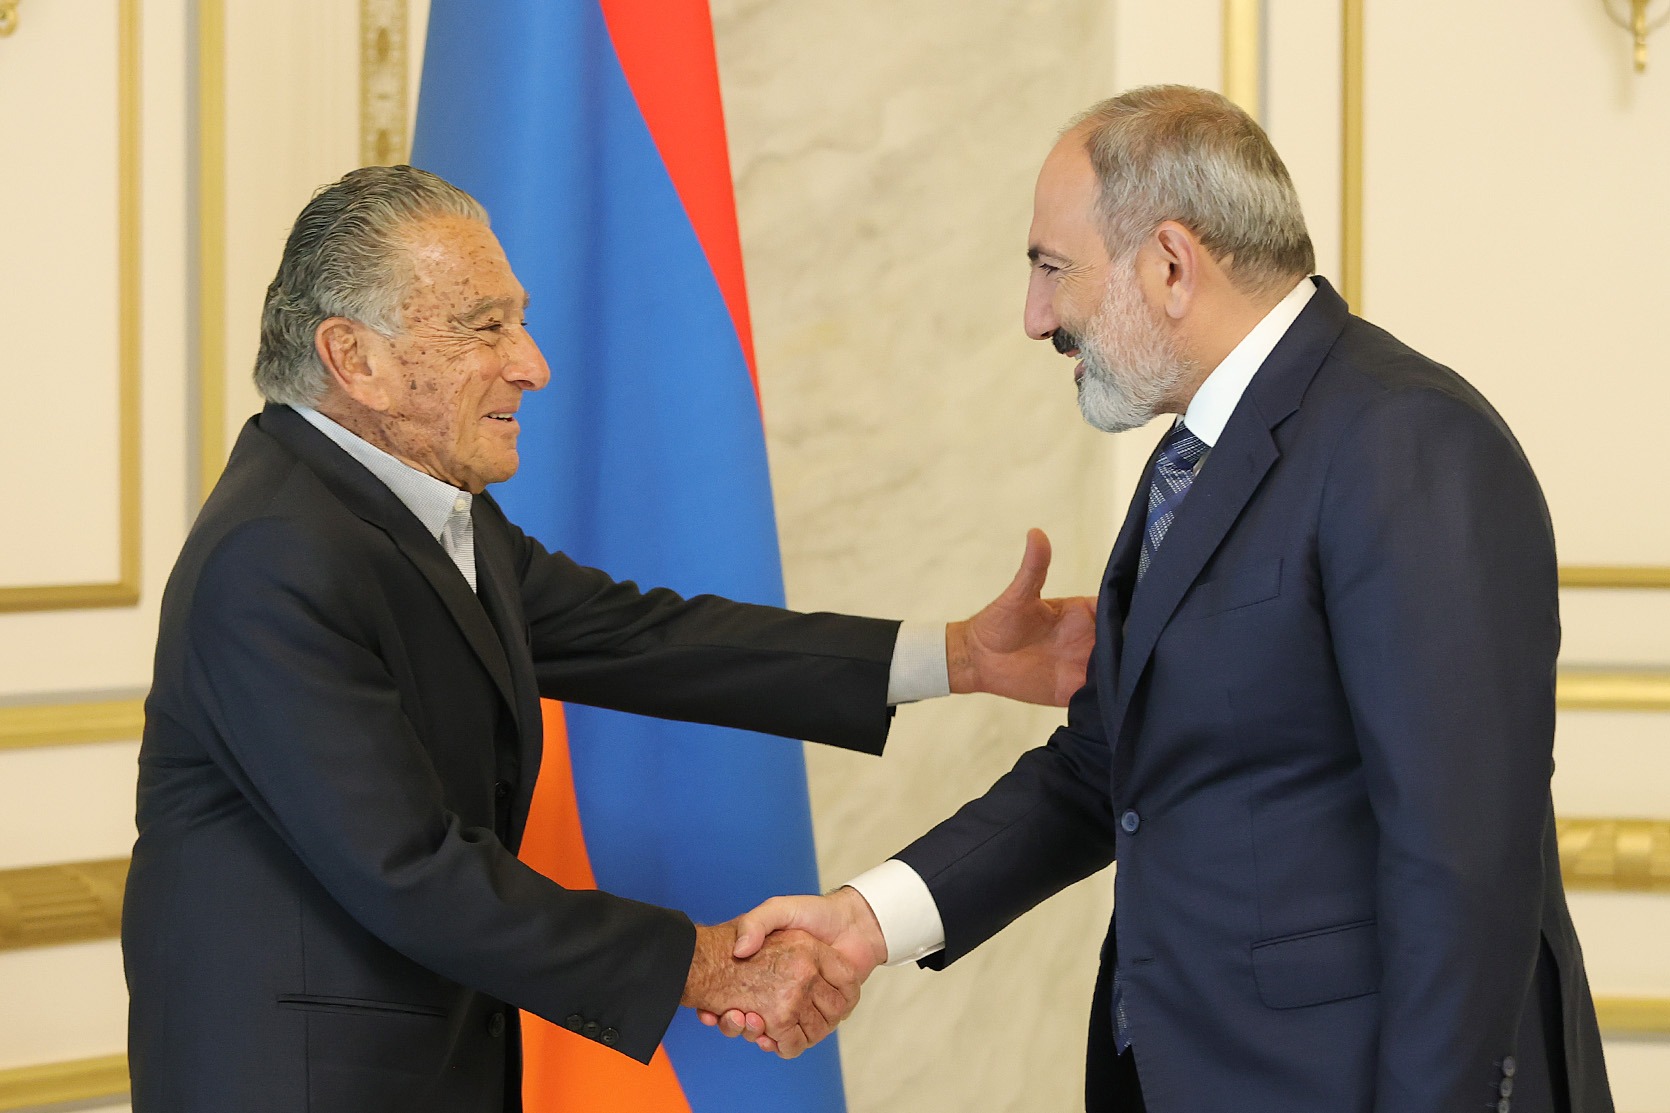 ‘We are firmly determined to continue making large-scale investments in Armenia’ – Eduardo Eurnekian tells Nikol Pashinyan